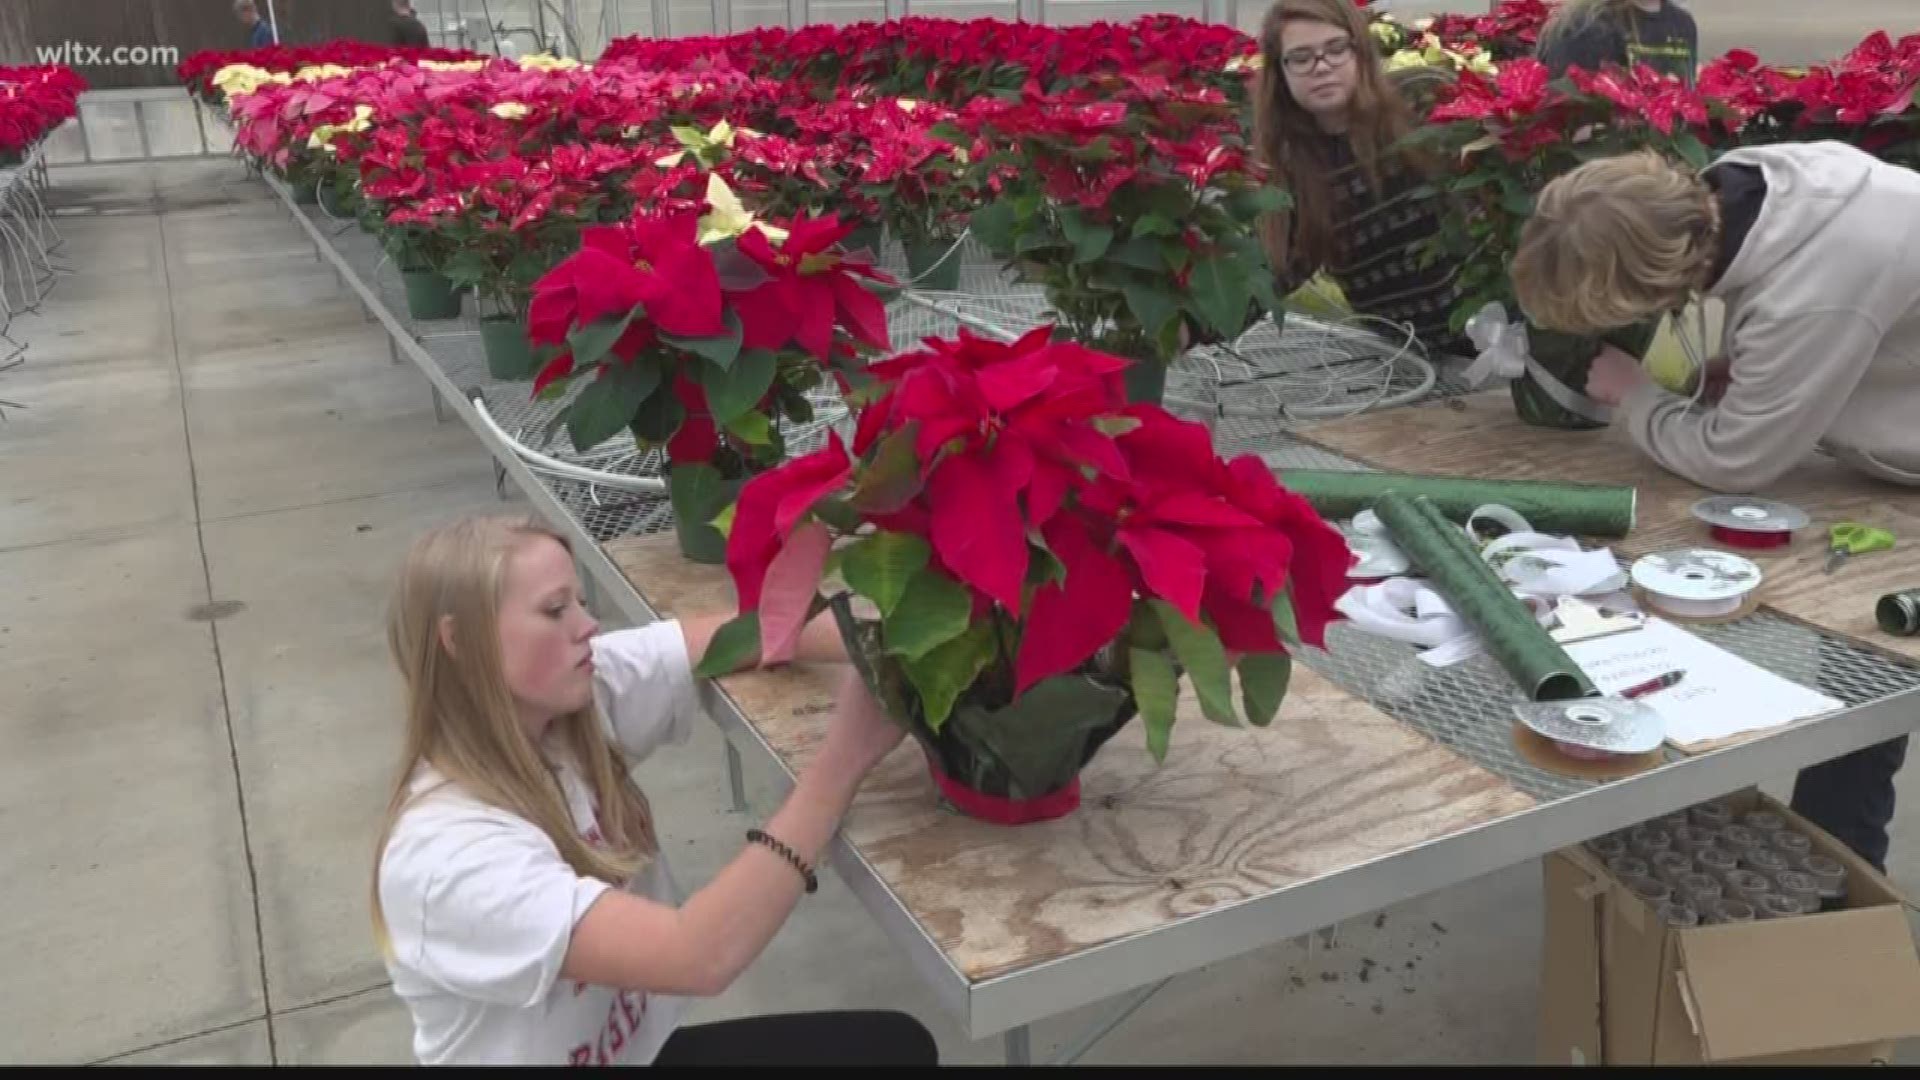 People can come by the greenhouse through Friday from 9-5 to get a poinsettia